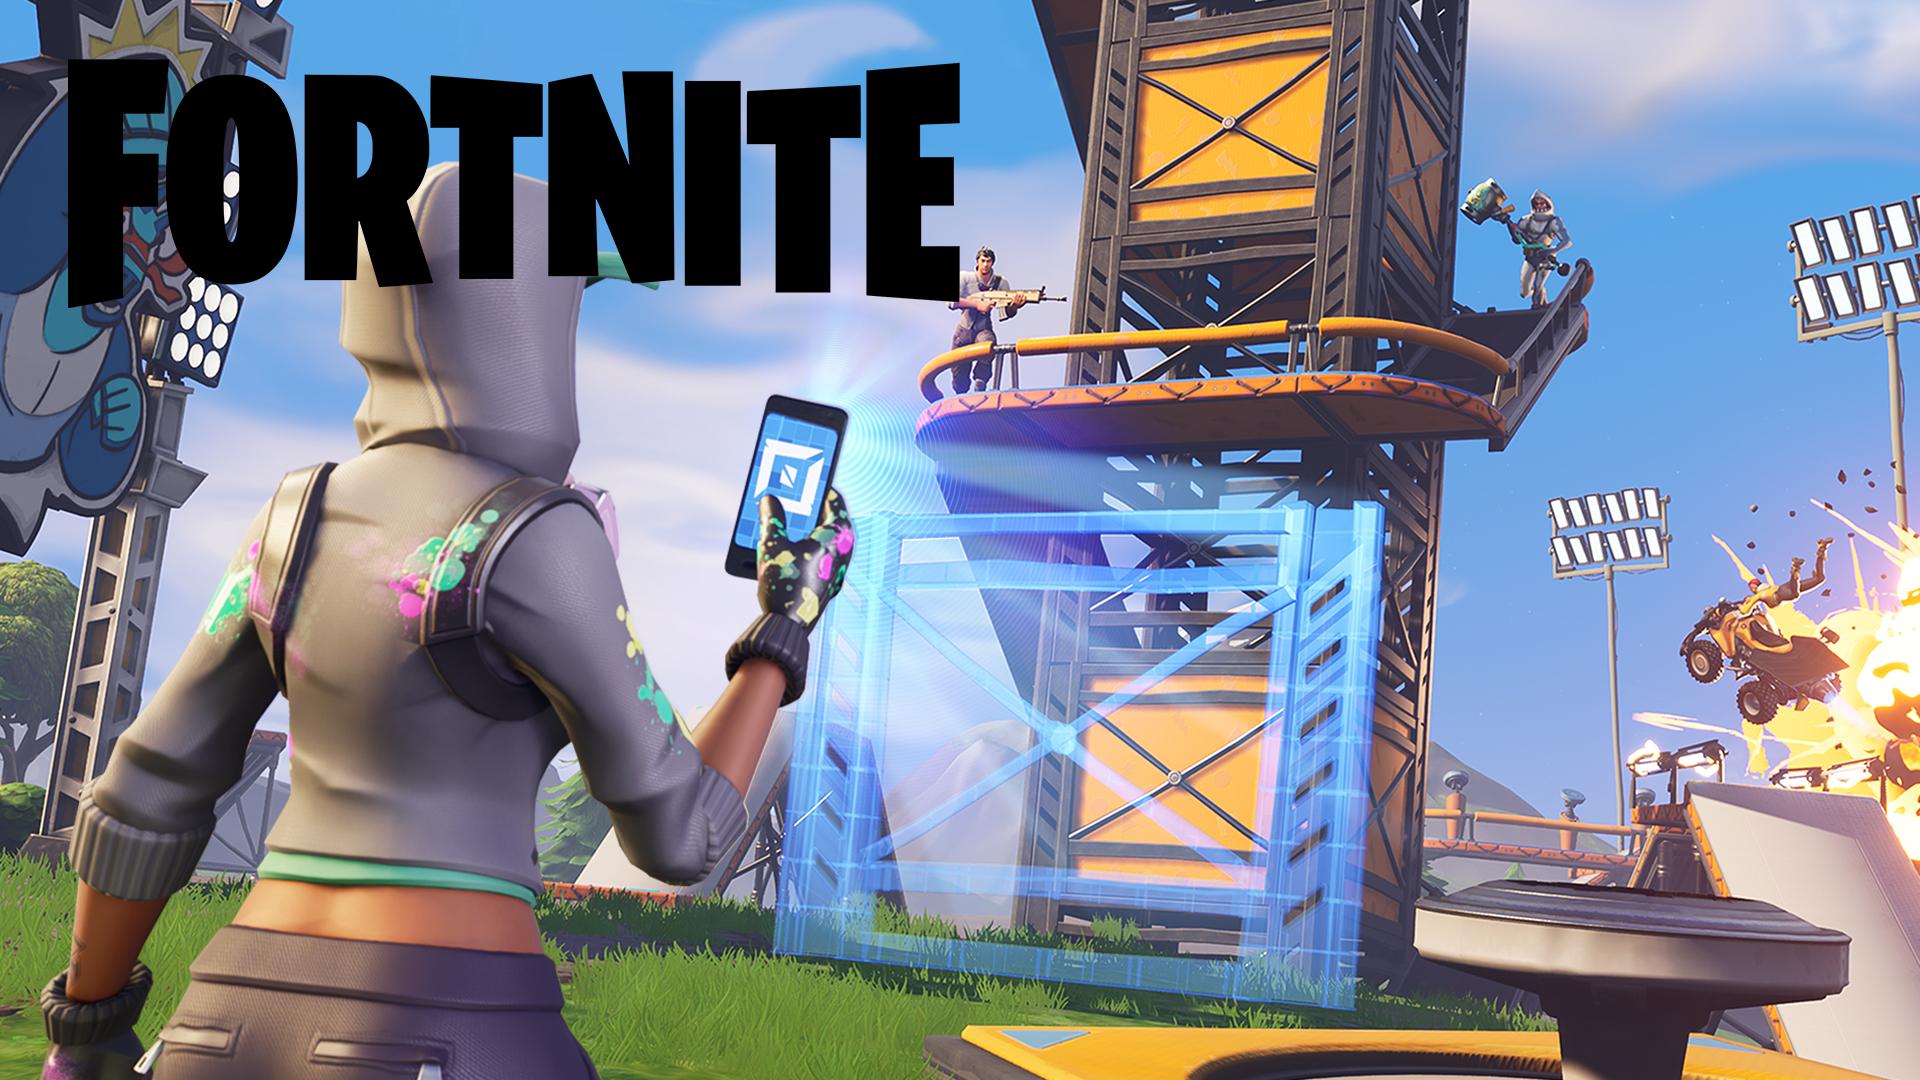 Fortnite Creative logo from inside the game